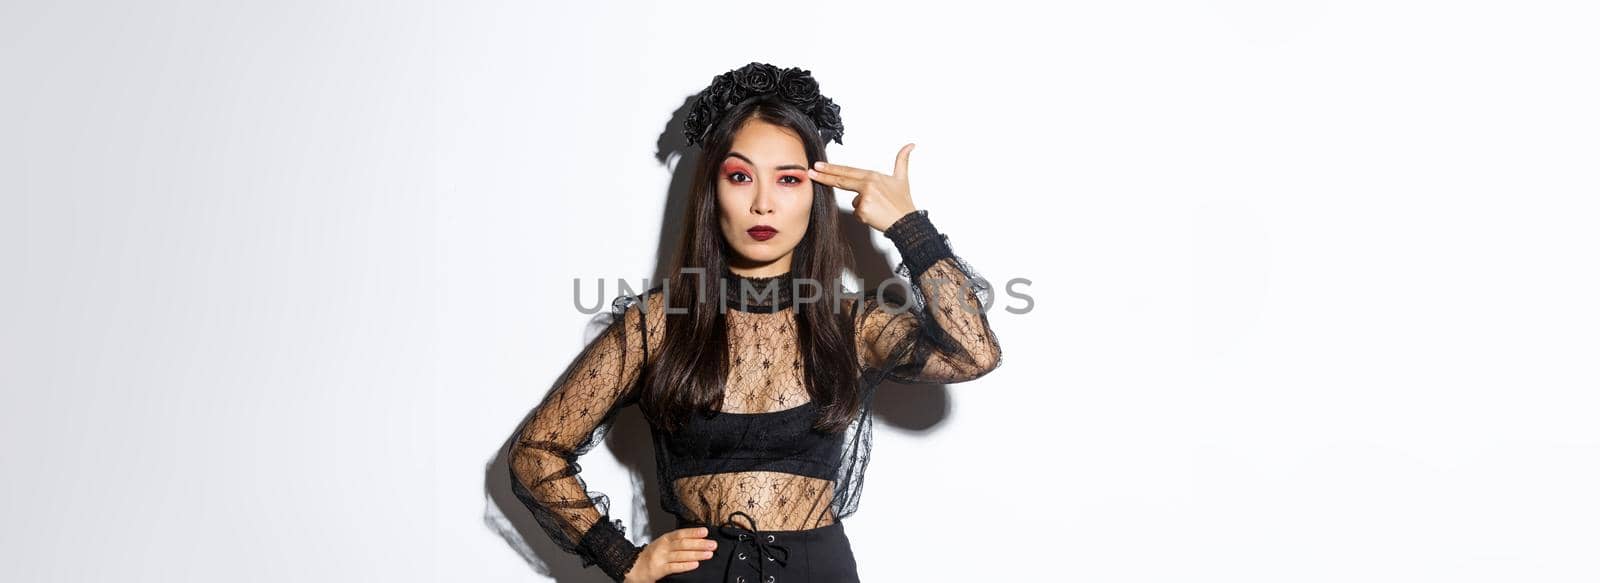 Annoyed young woman looking disappointed while making finger gun gesture over head, wearing halloween costume, standing over white background by Benzoix